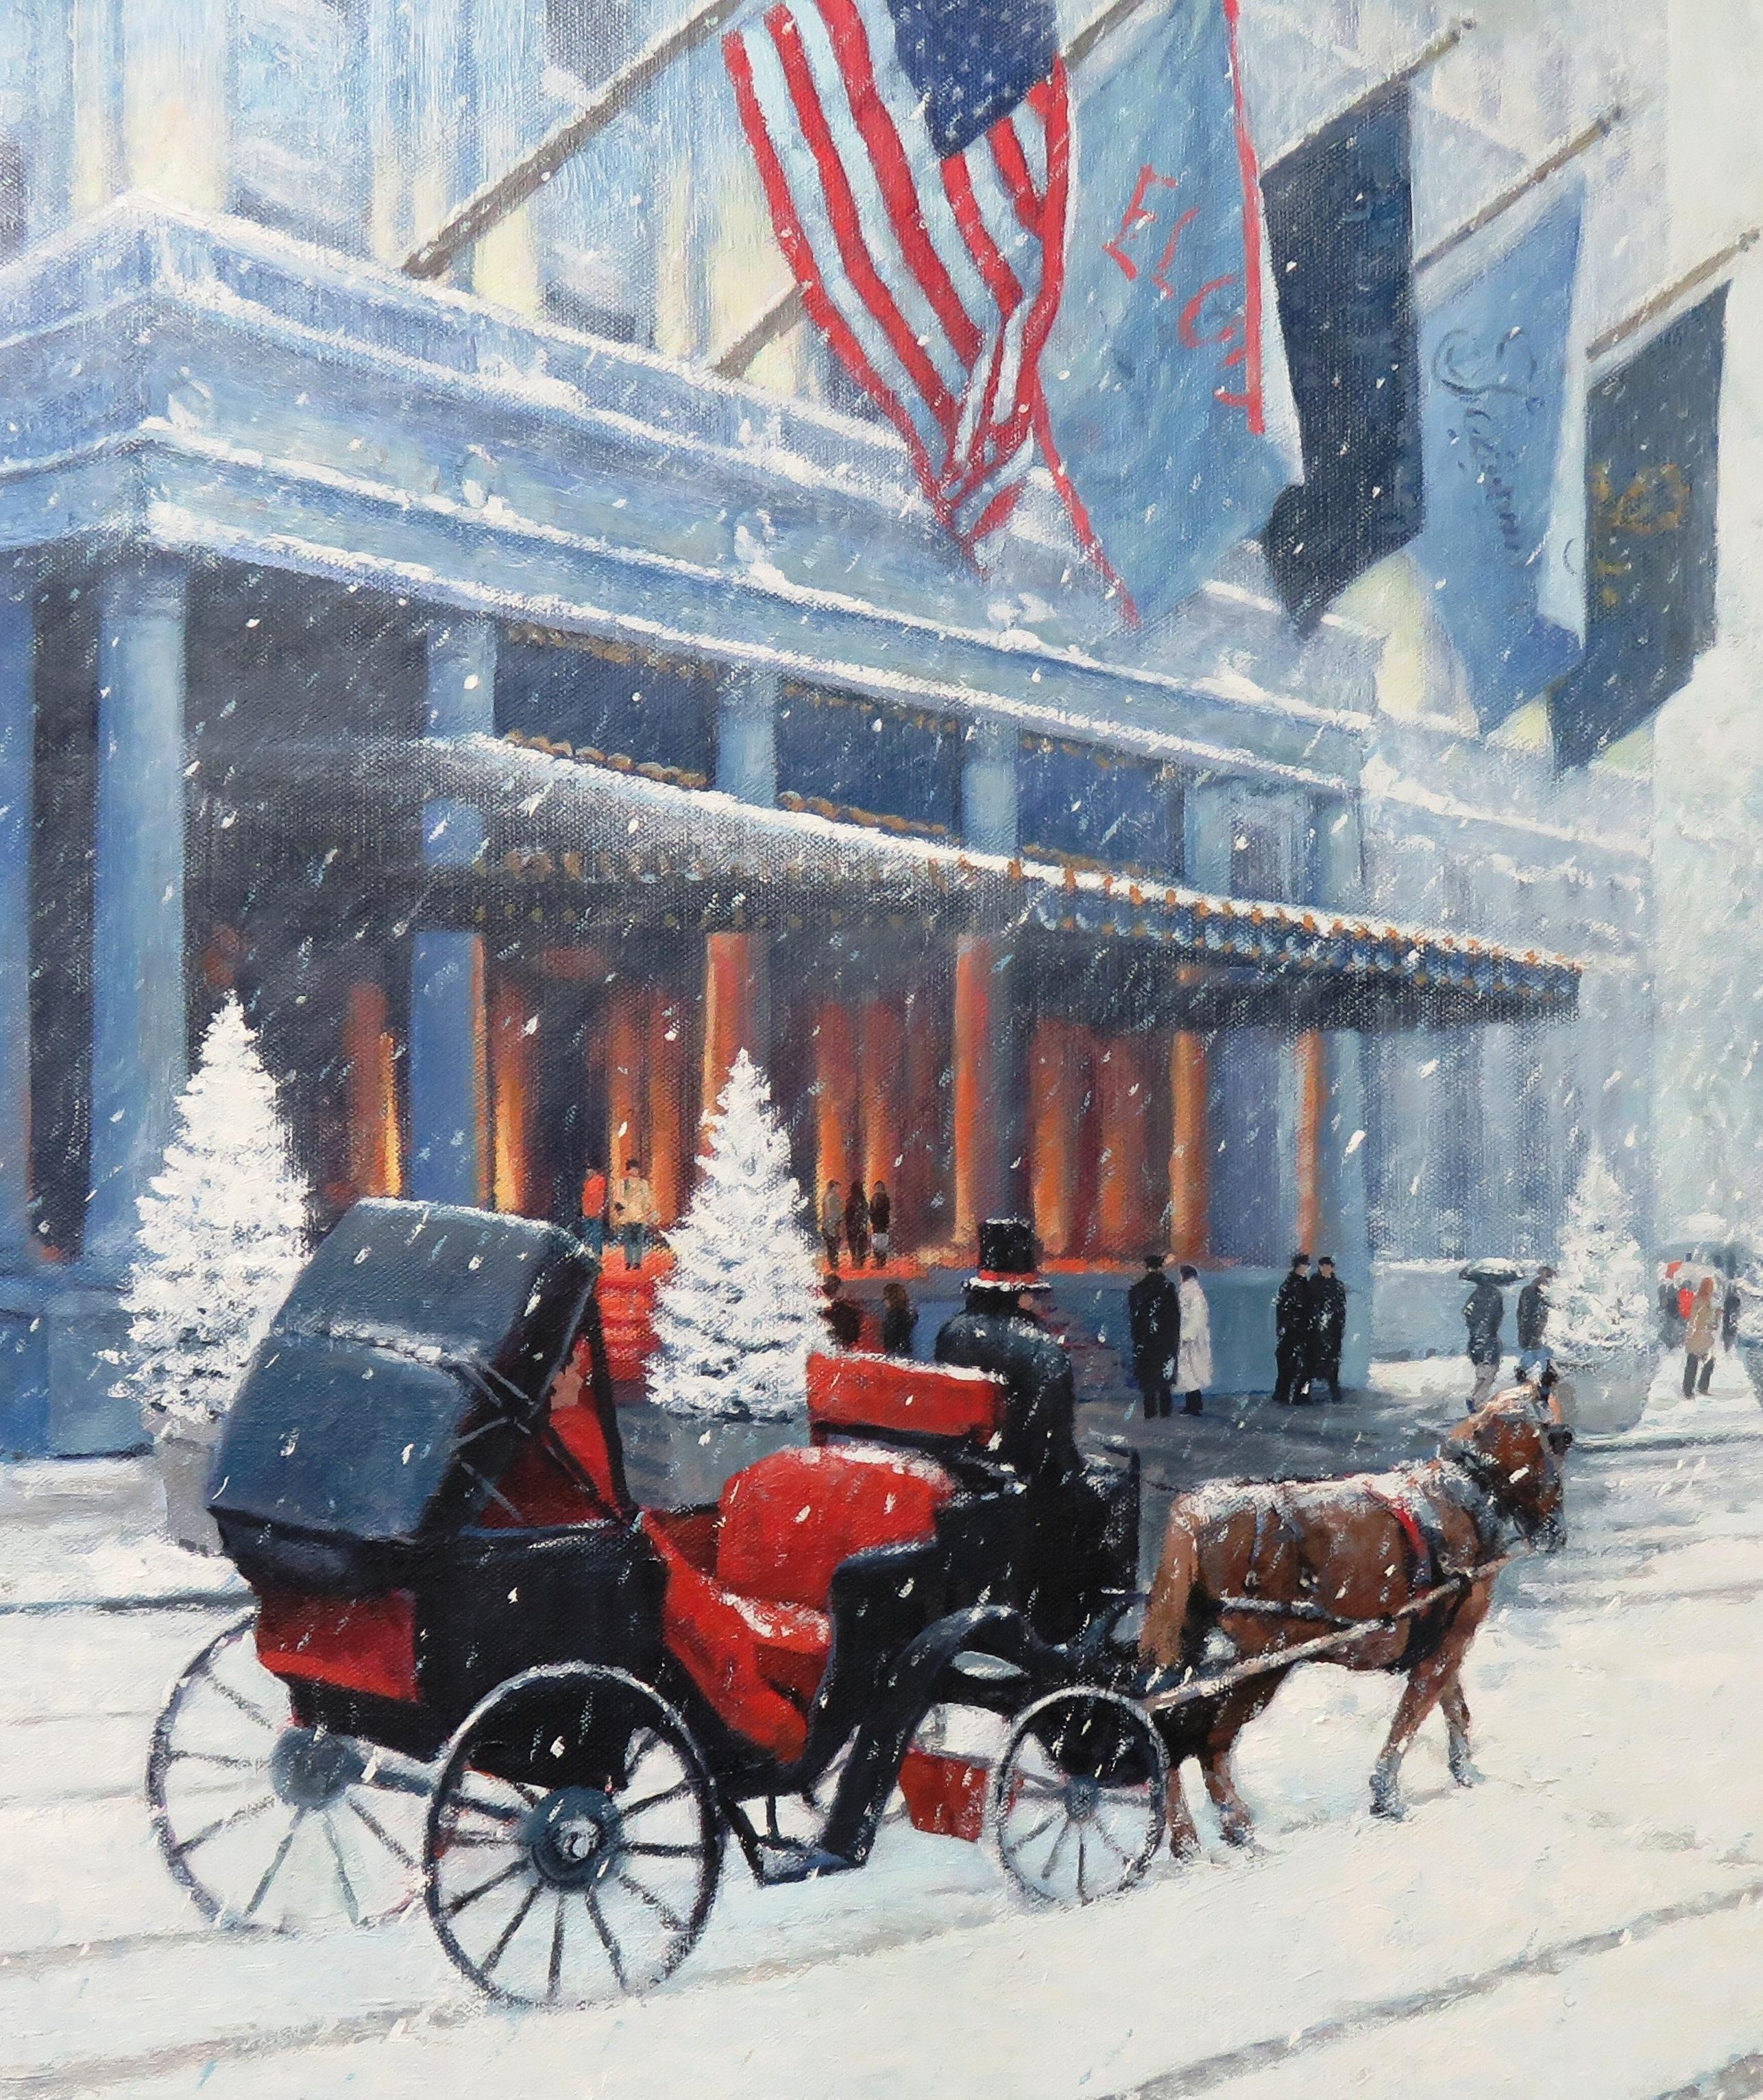 New York City Winter Landscape Plaza Hotel Oil Painting by Michael Budden 2